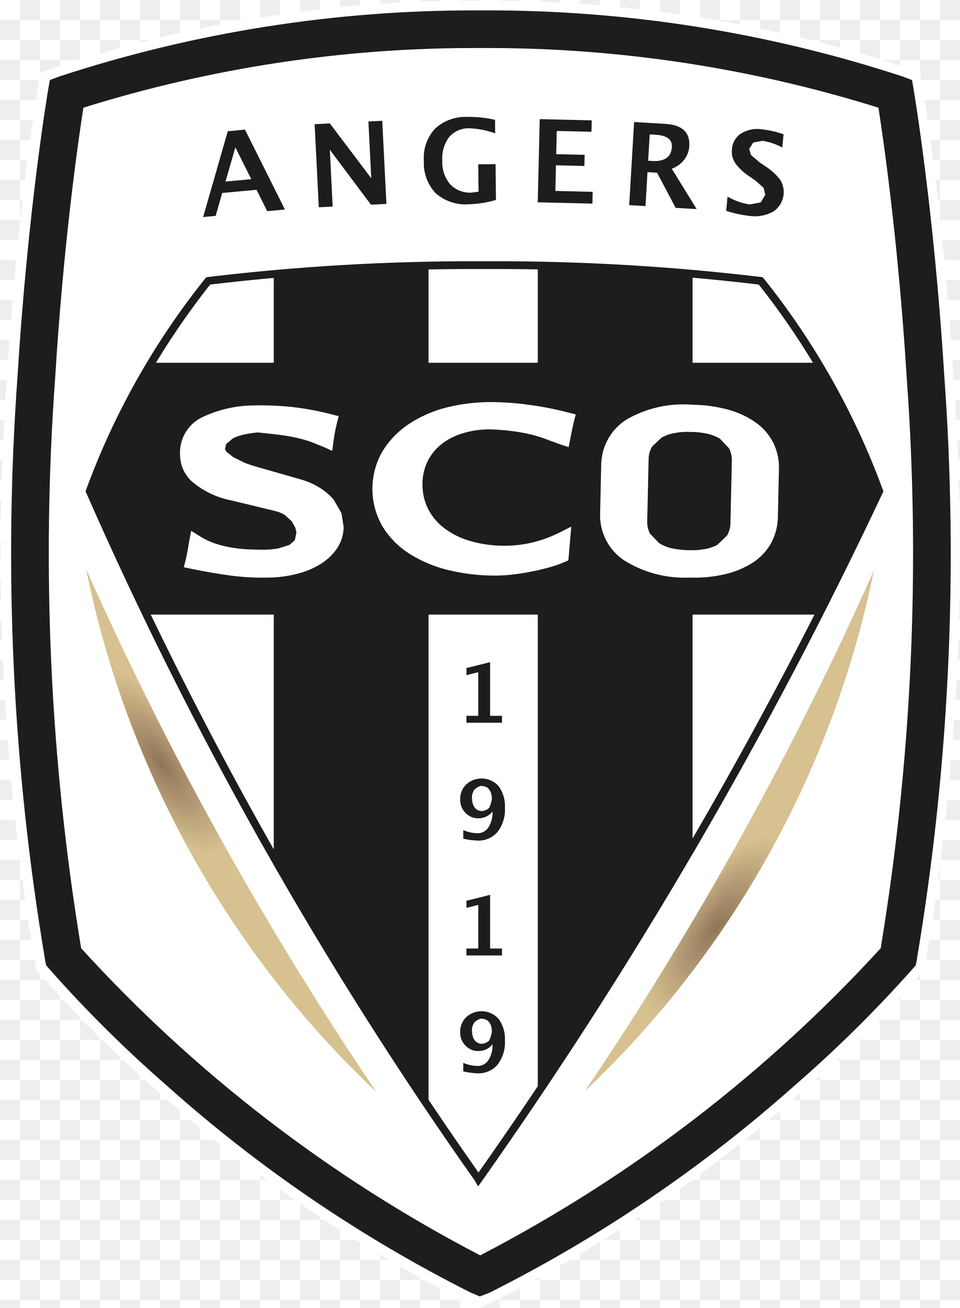 Angers Sco Logo And Vector Logo Download Angers Fc Logo, Armor, Symbol, Badge, Blade Free Transparent Png